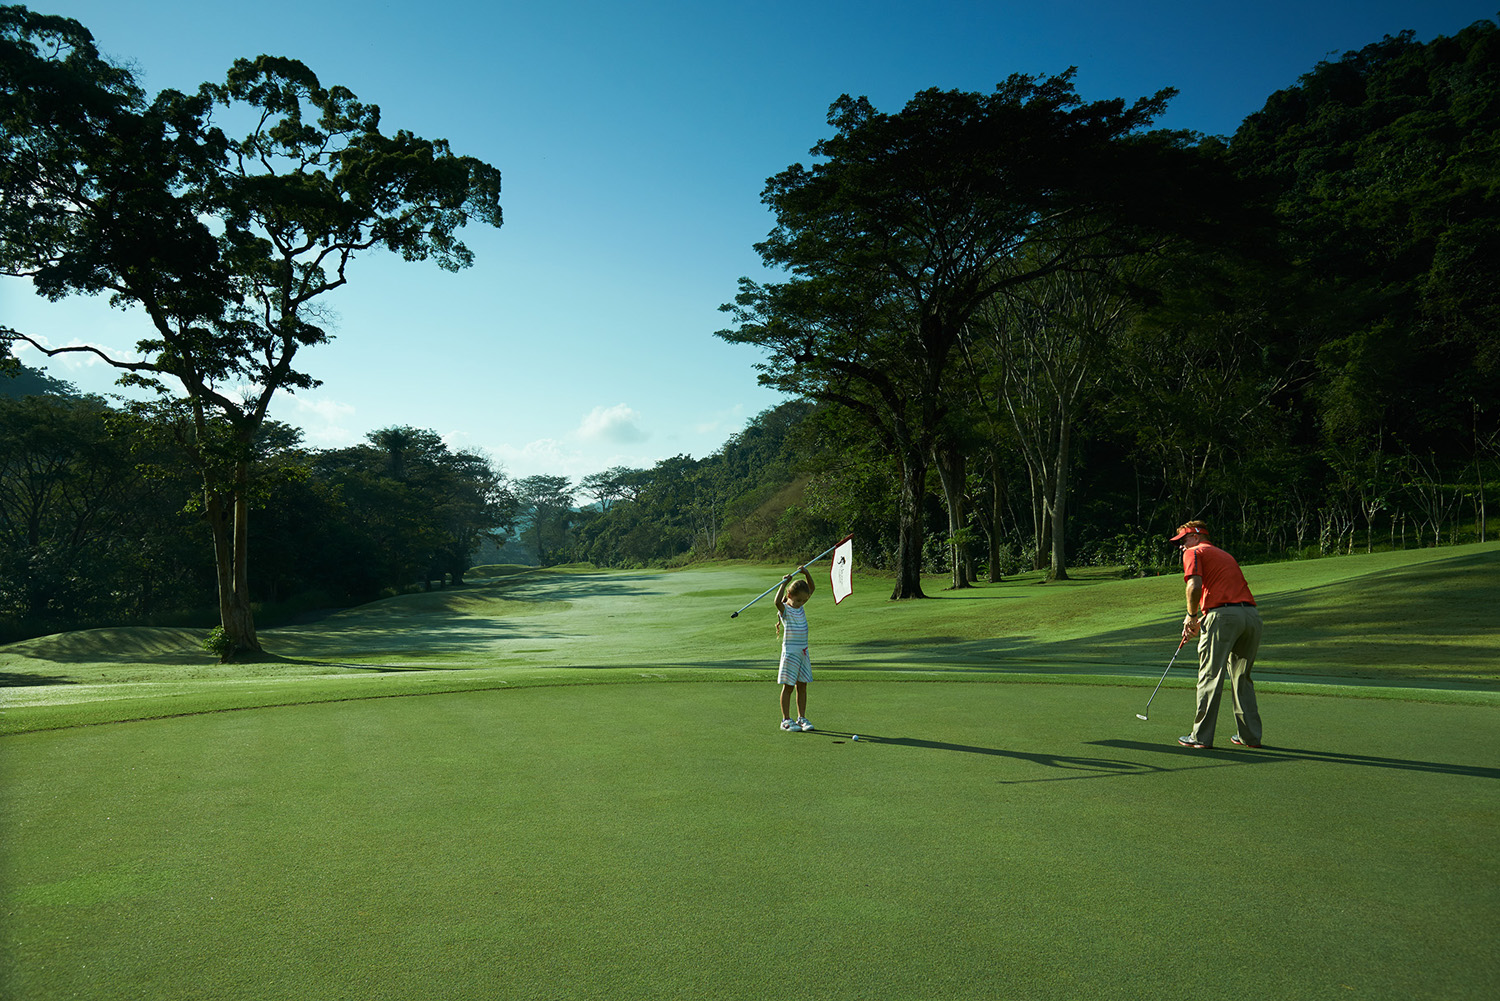 Los Sueños Marriott Ocean & Golf Resort in Costa Rica offers complimentary Spanish lessons, gallo pinto classes and golf.